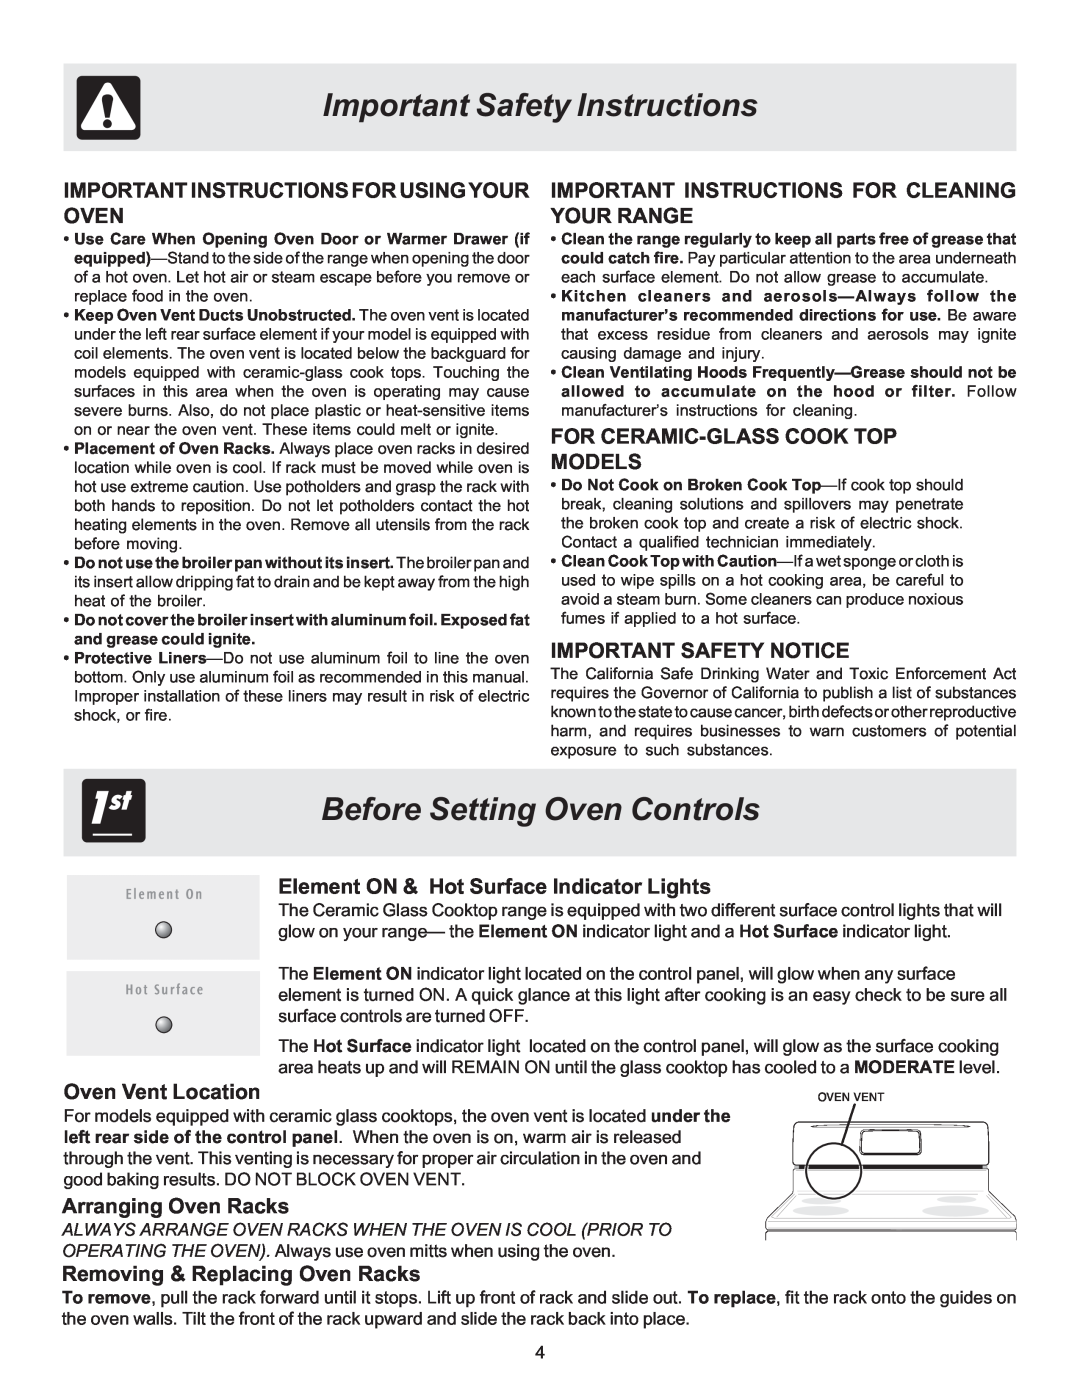 White-Westinghouse ES100 Before Setting Oven Controls, Important Instructions For Usingyour Oven, Important Safety Notice 